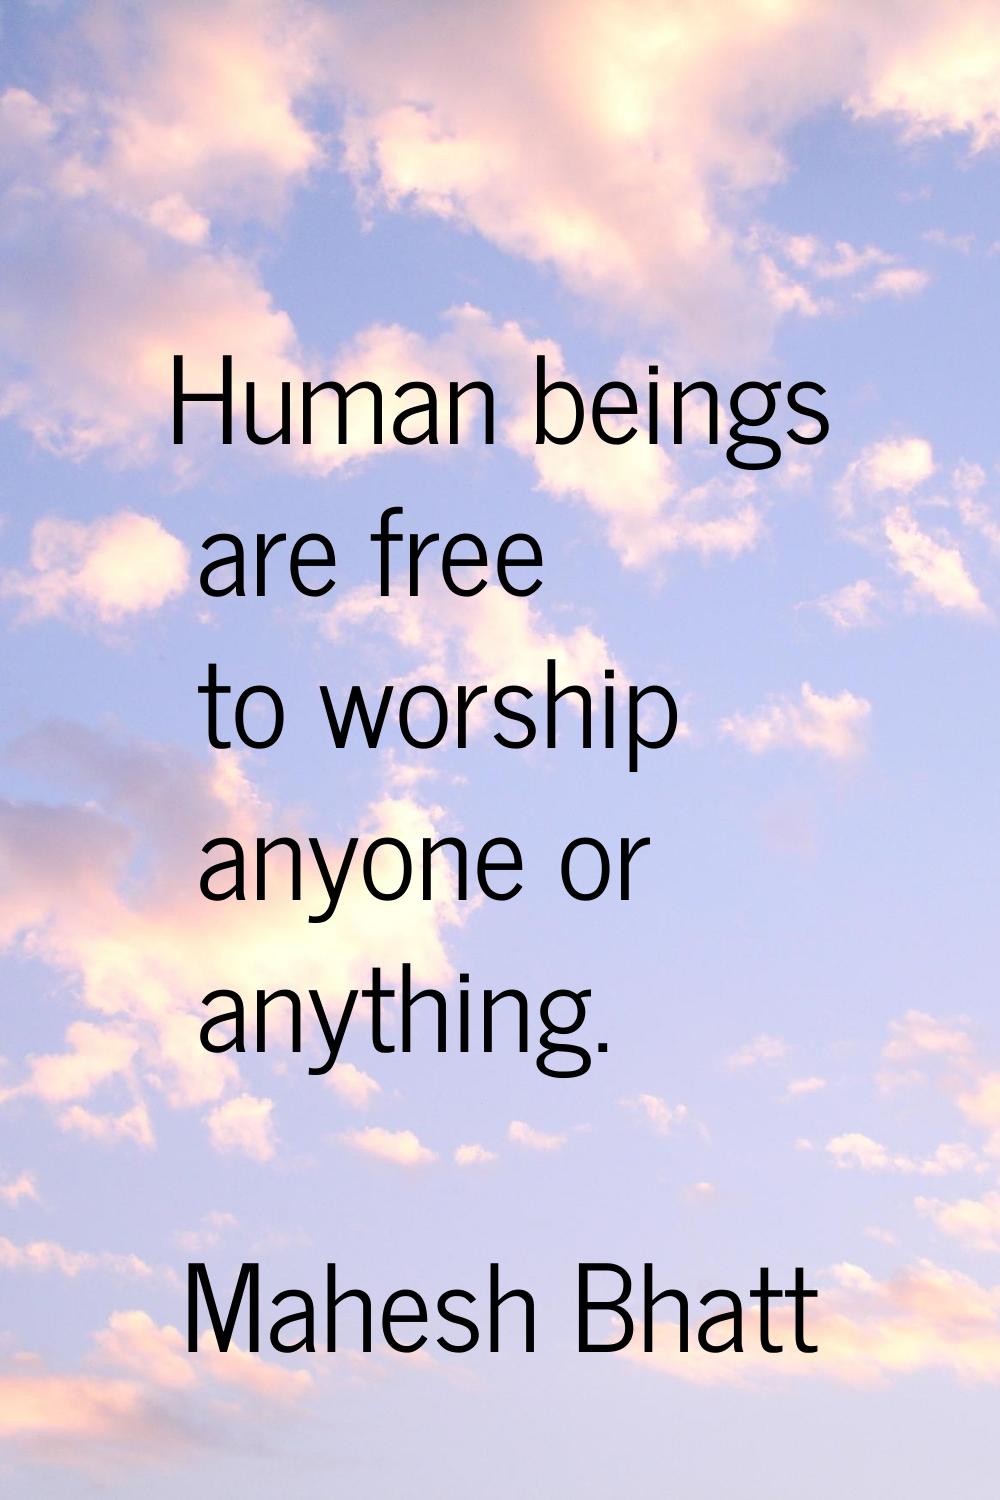 Human beings are free to worship anyone or anything.